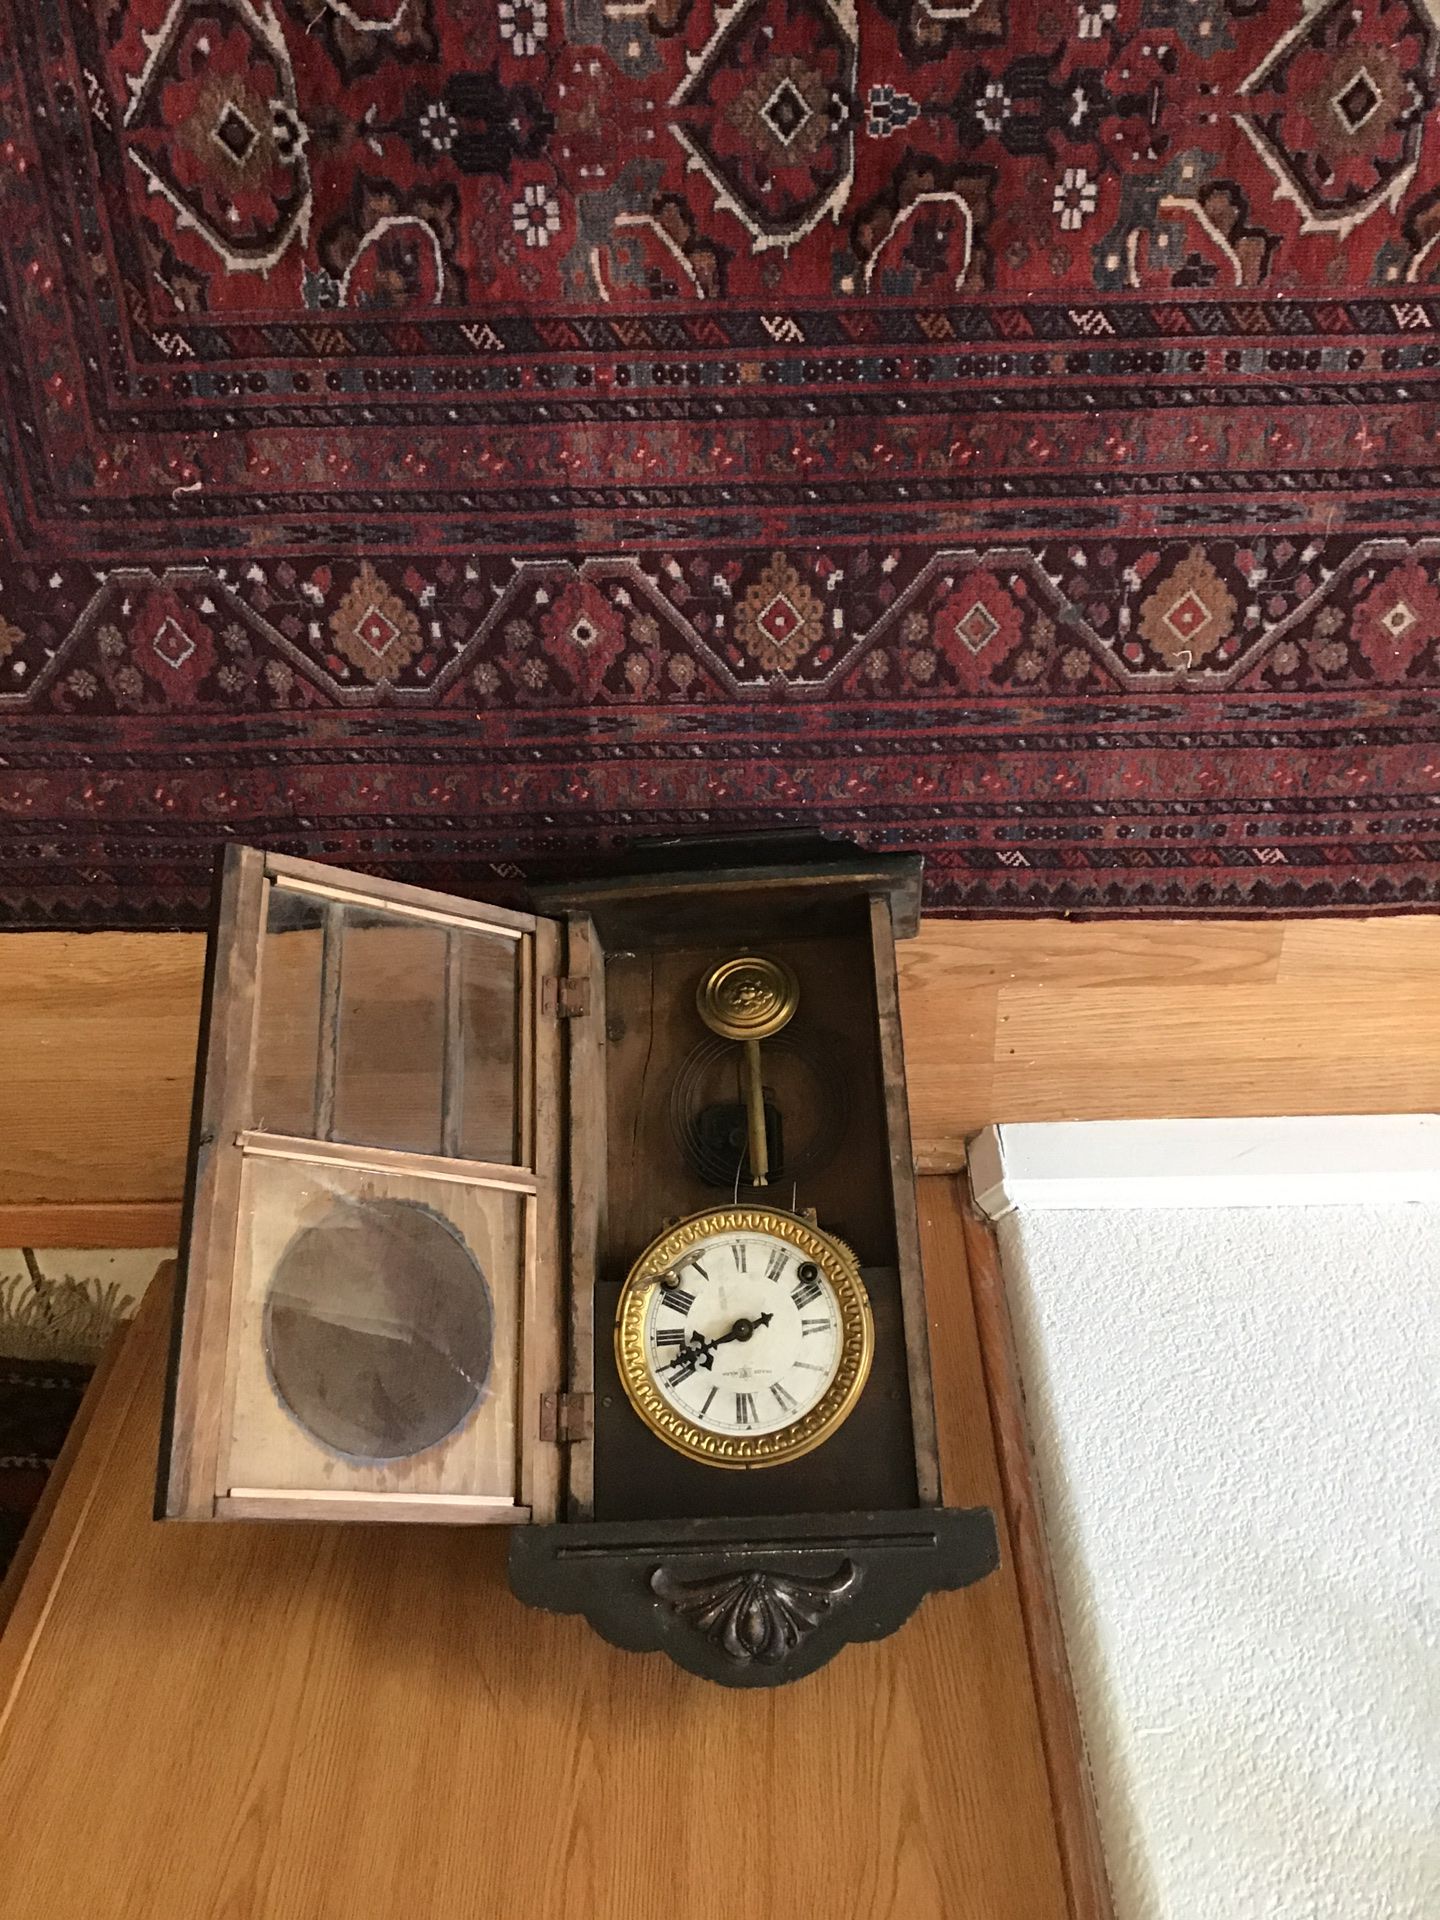 Very old clock works perfect150